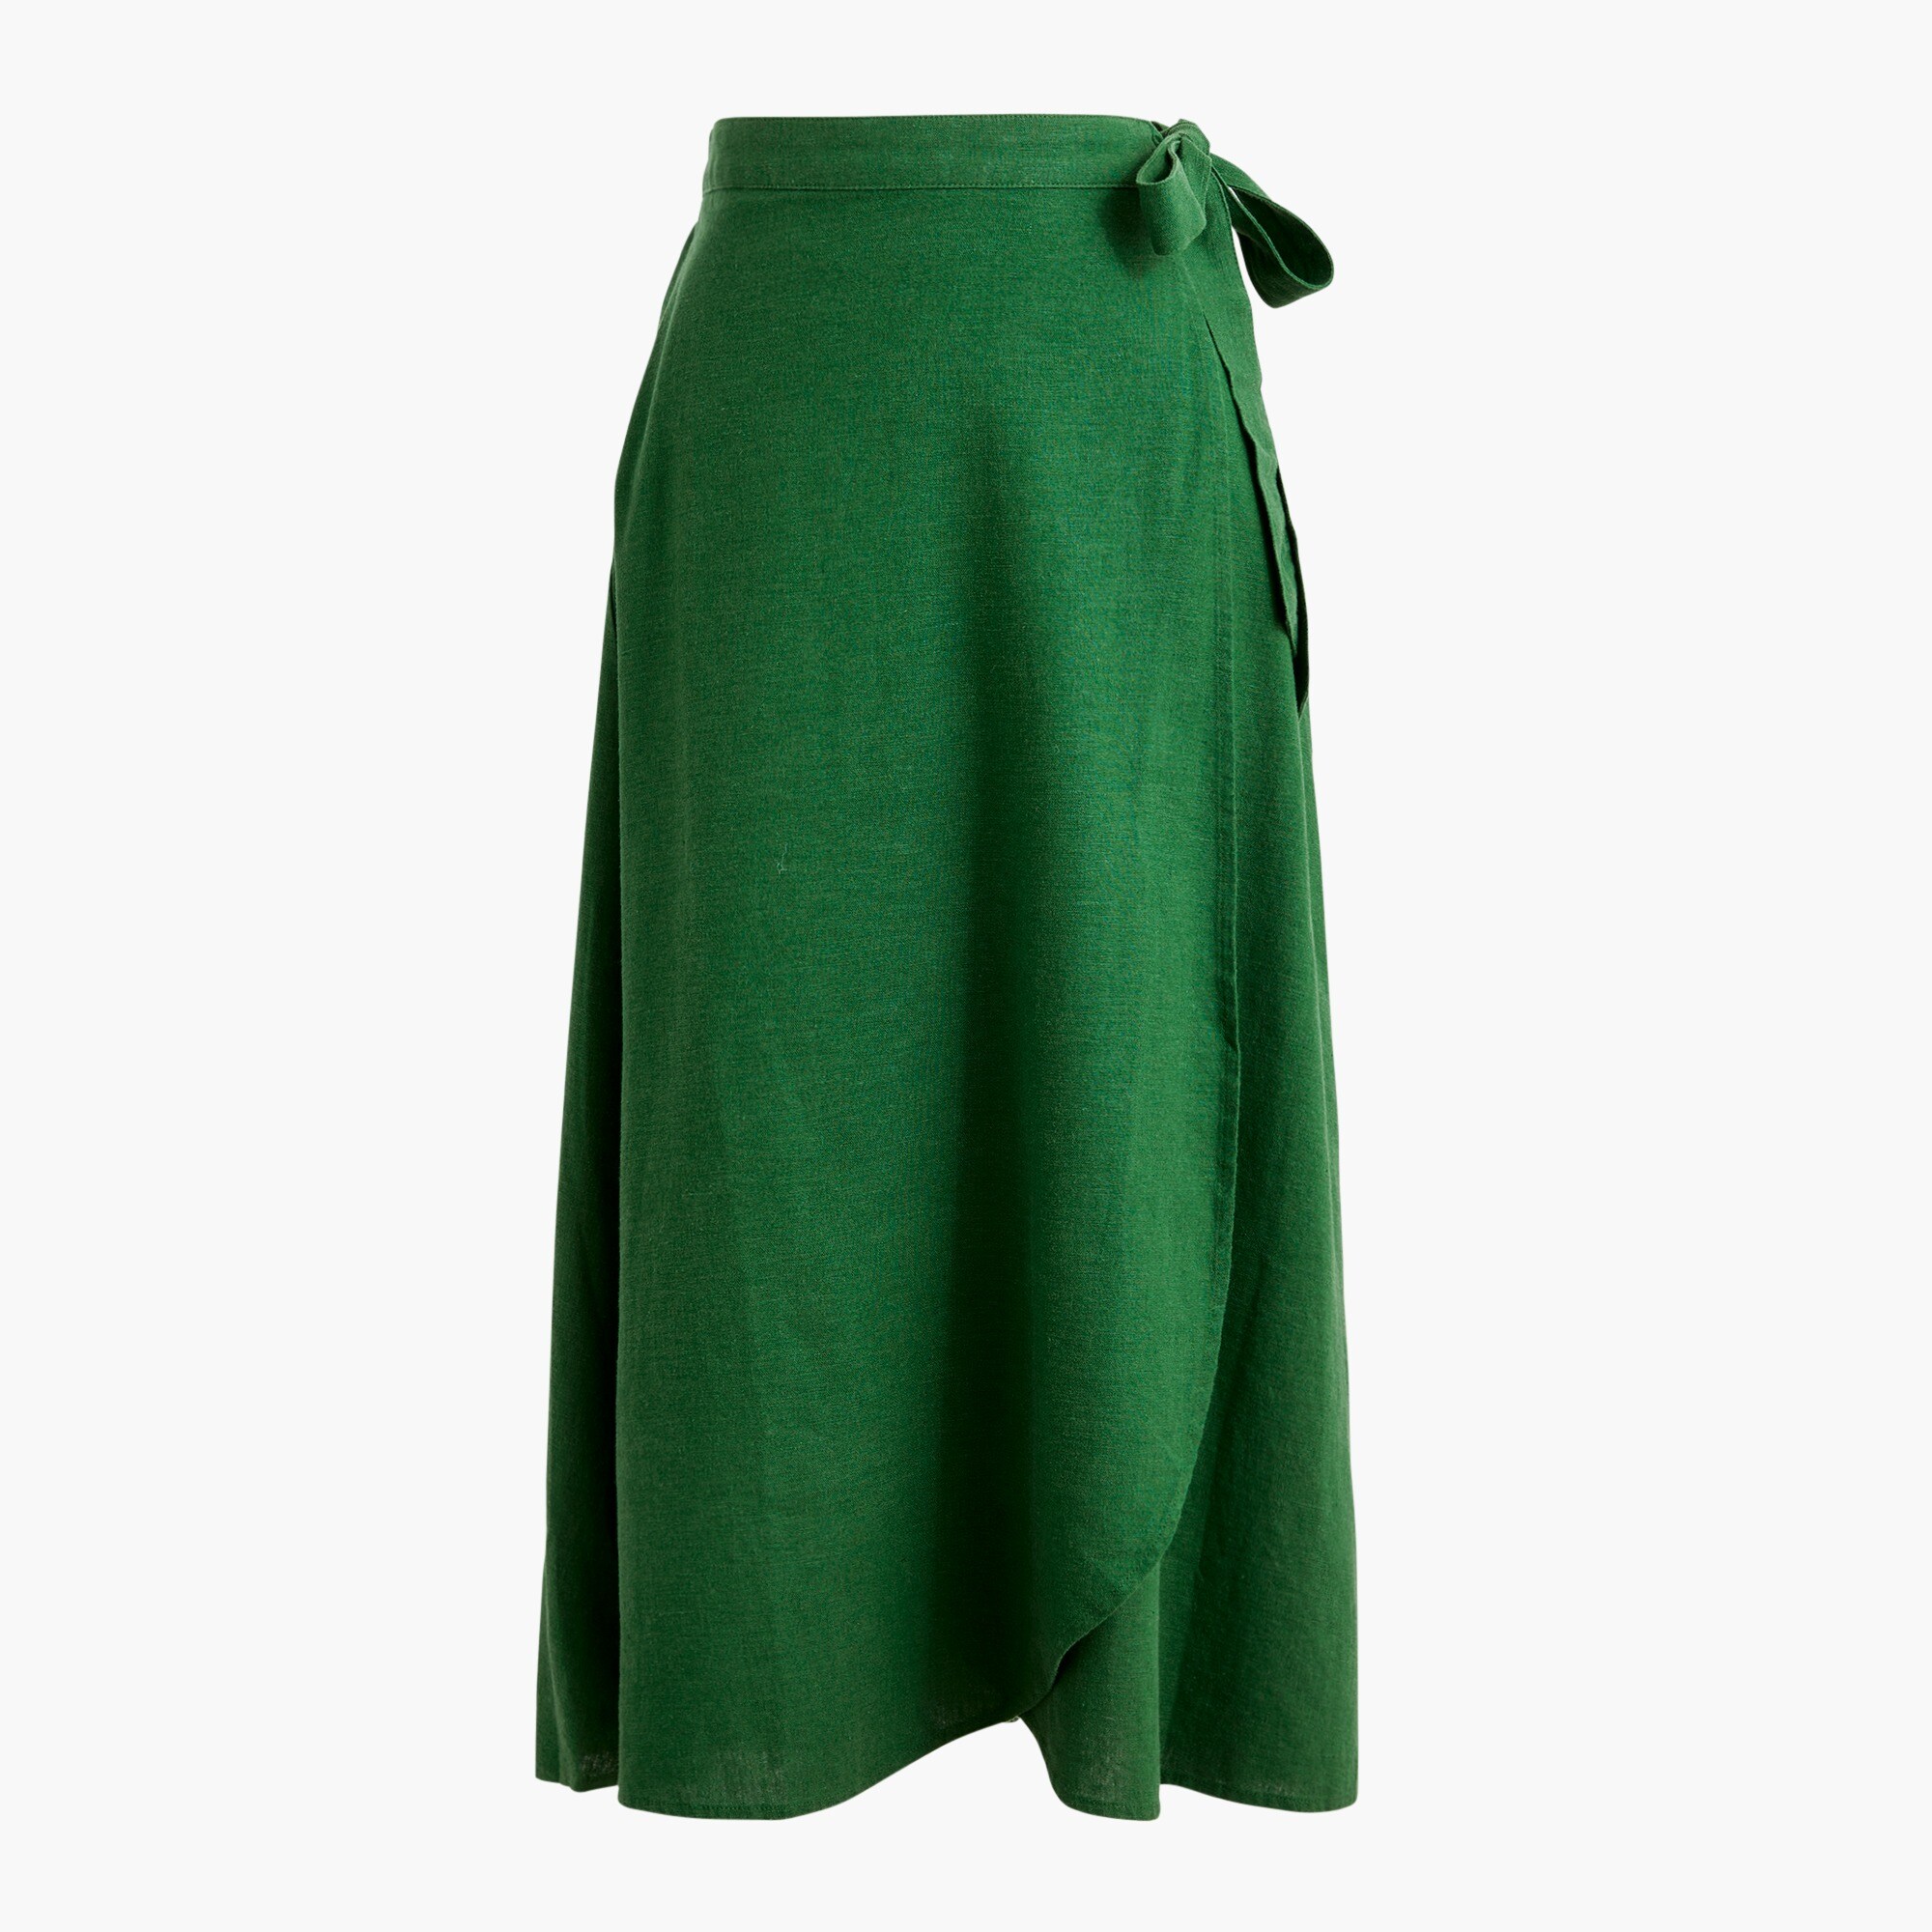  Pull-on faux-wrap skirt